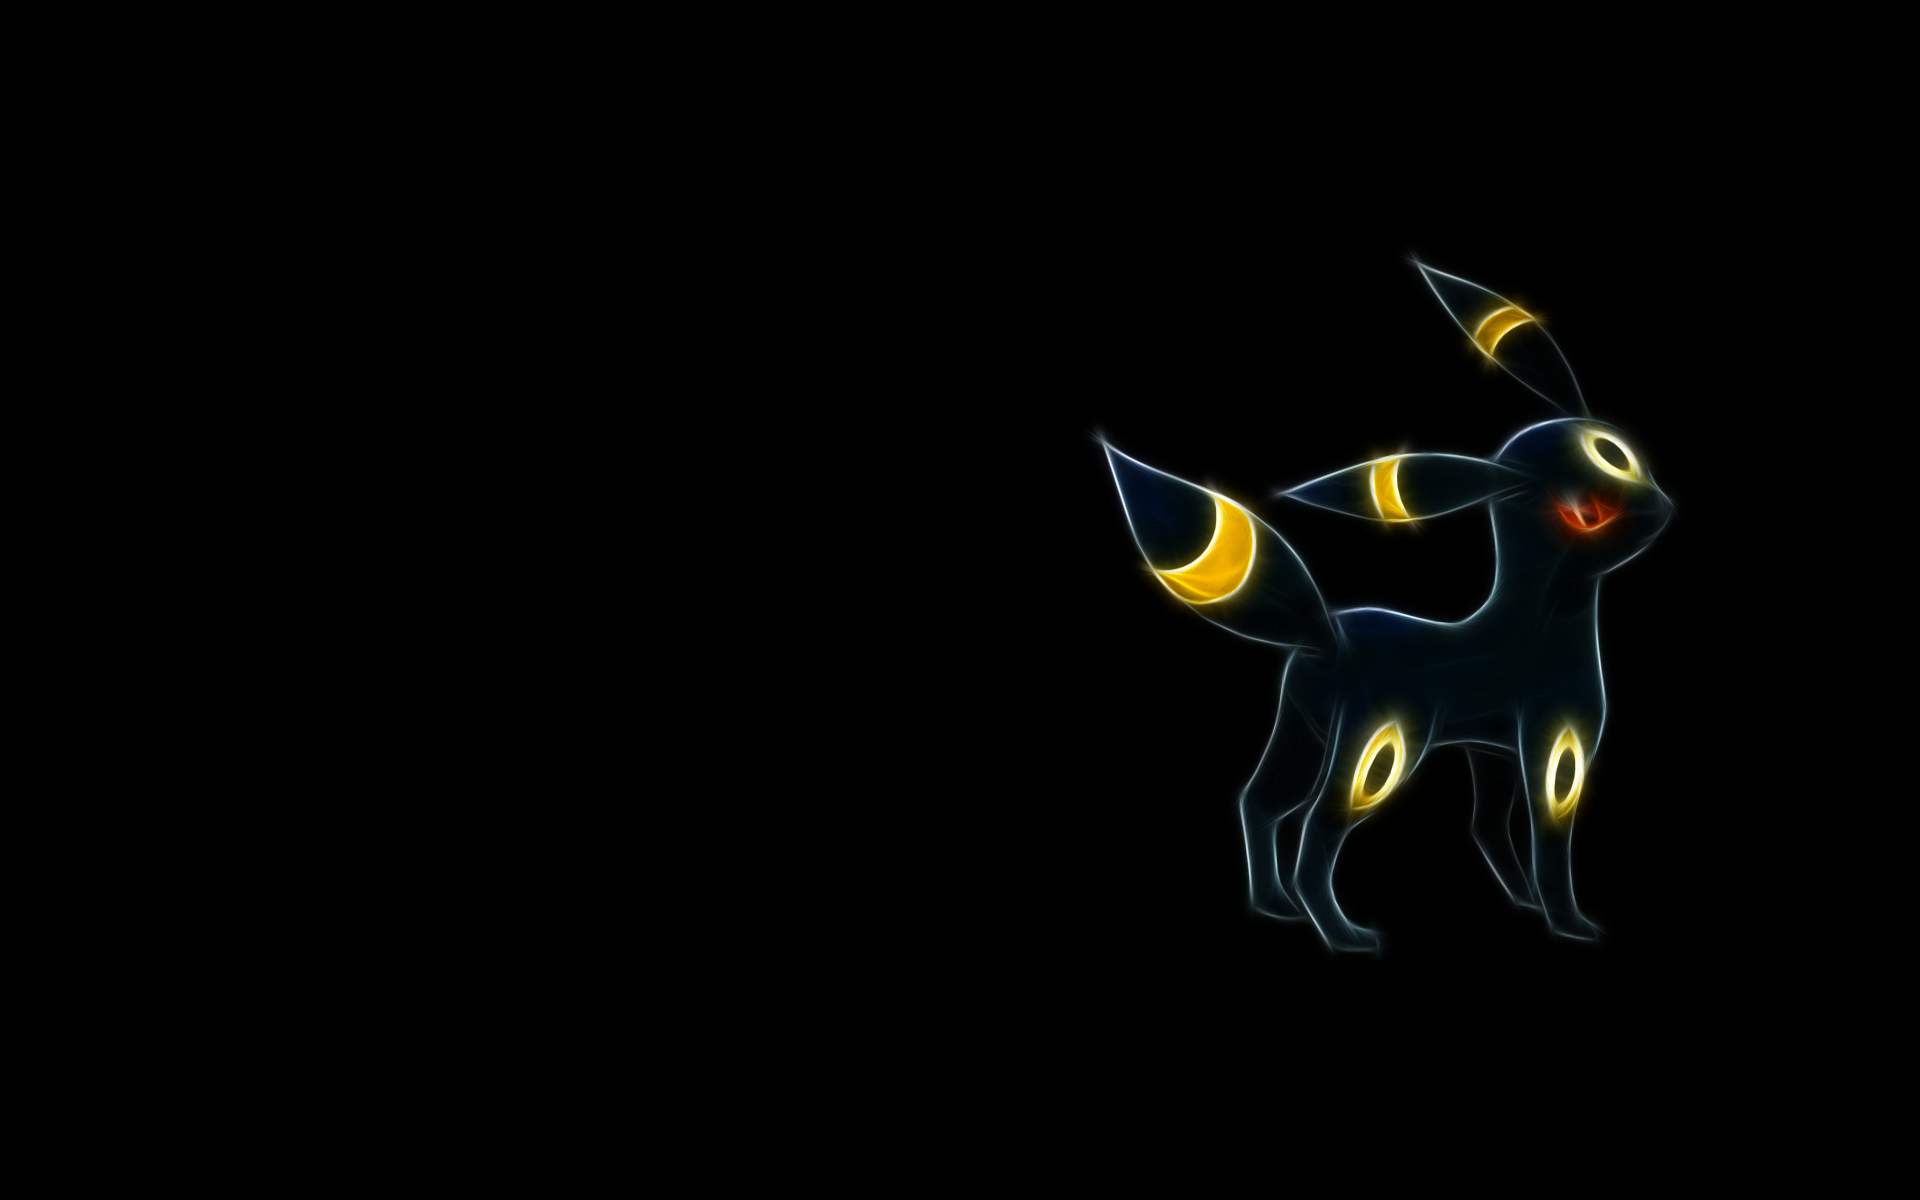 Image Gallery For Umbreon Wallpaper